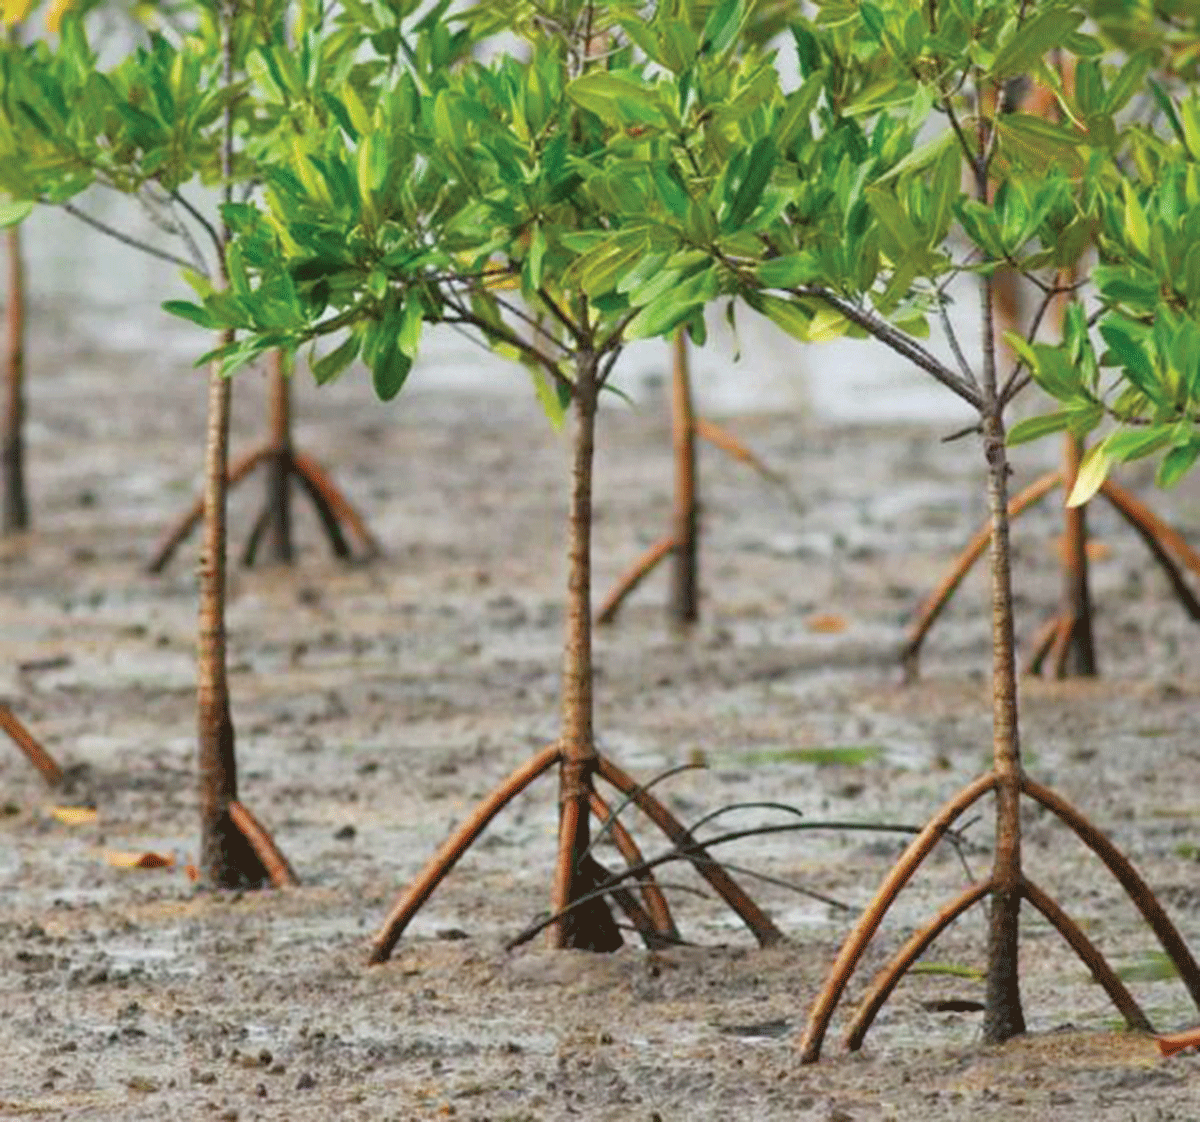 Globe Zsl Join Hands With Iloilo Fisherfolks For Mangrove Conservation Project